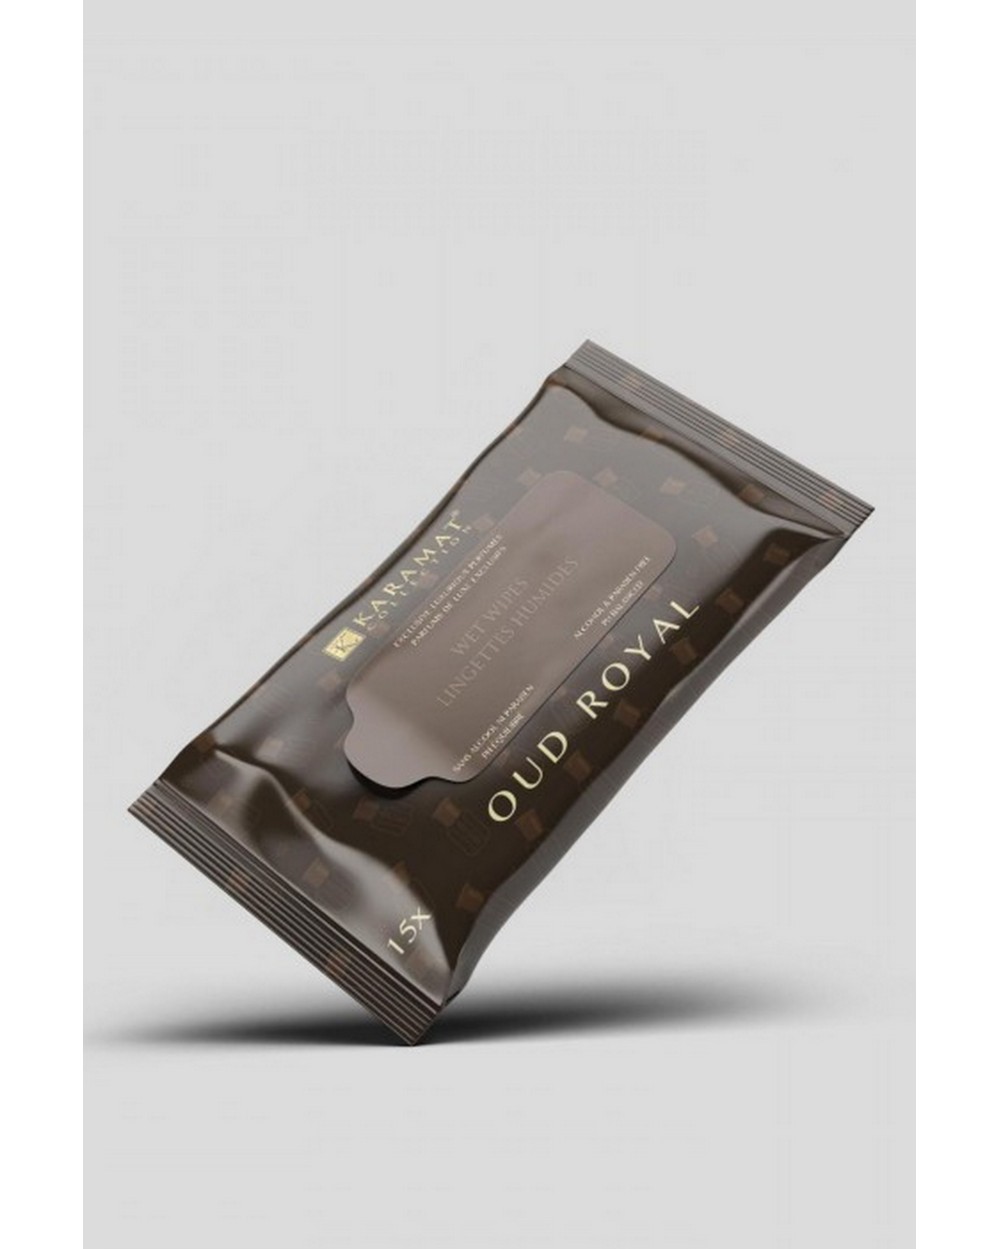 Oud royal Karamat scented cleansing wipes